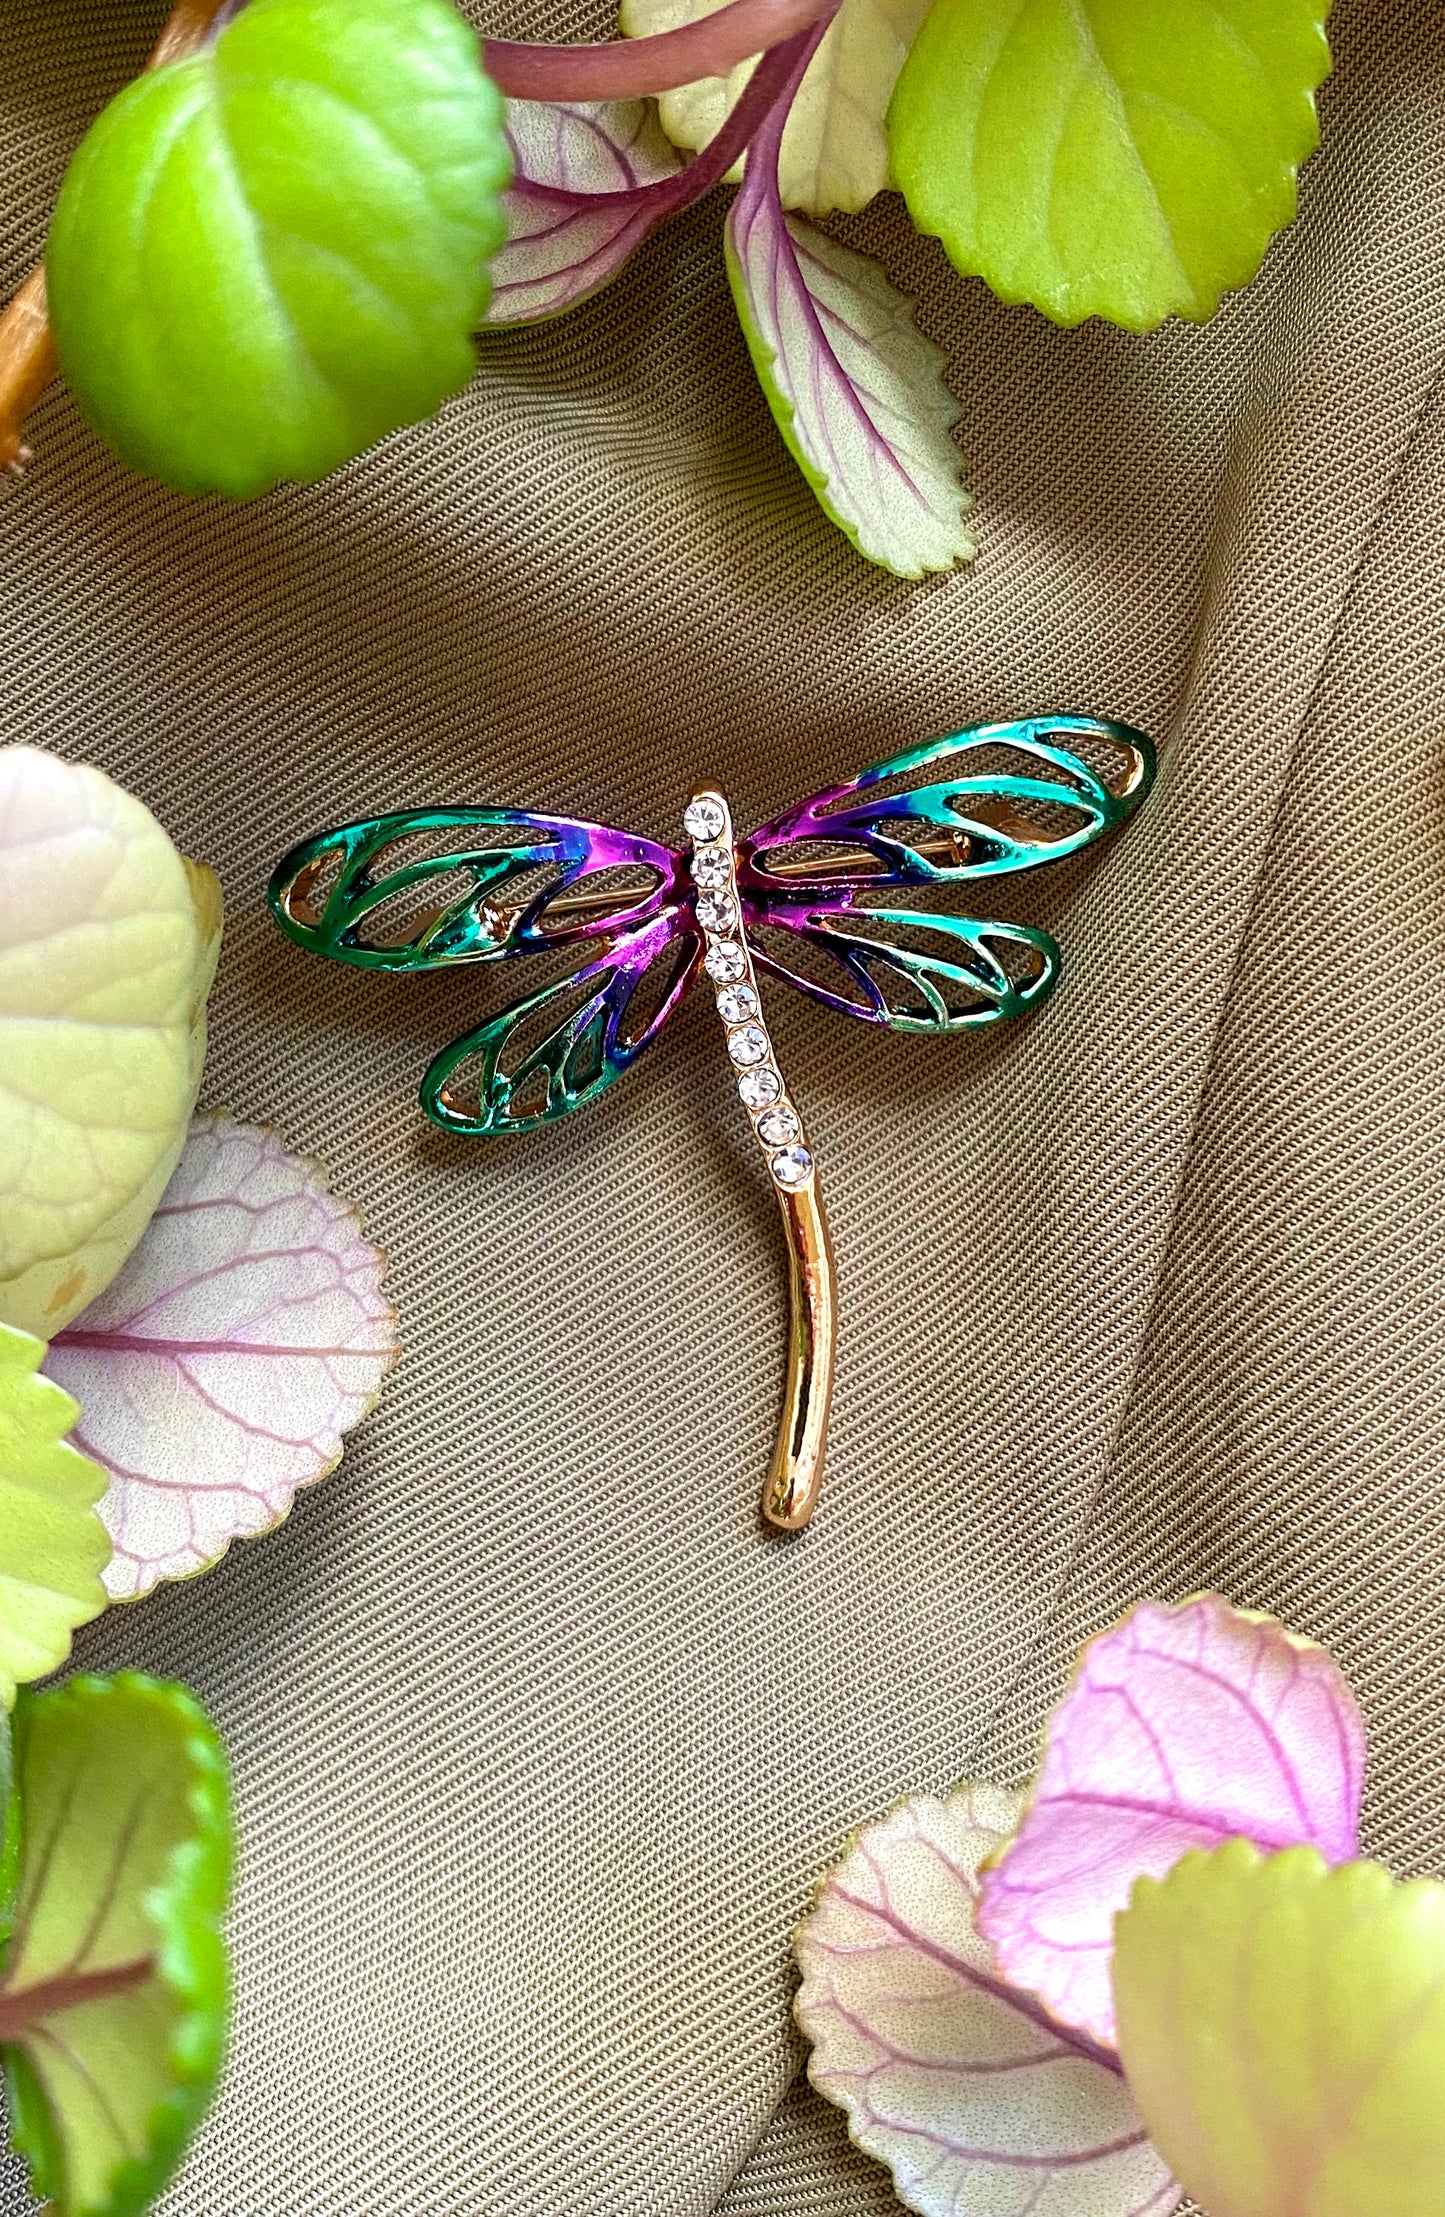 Ombre Rhinestone Vintage Inspired Dragonfly Brooch